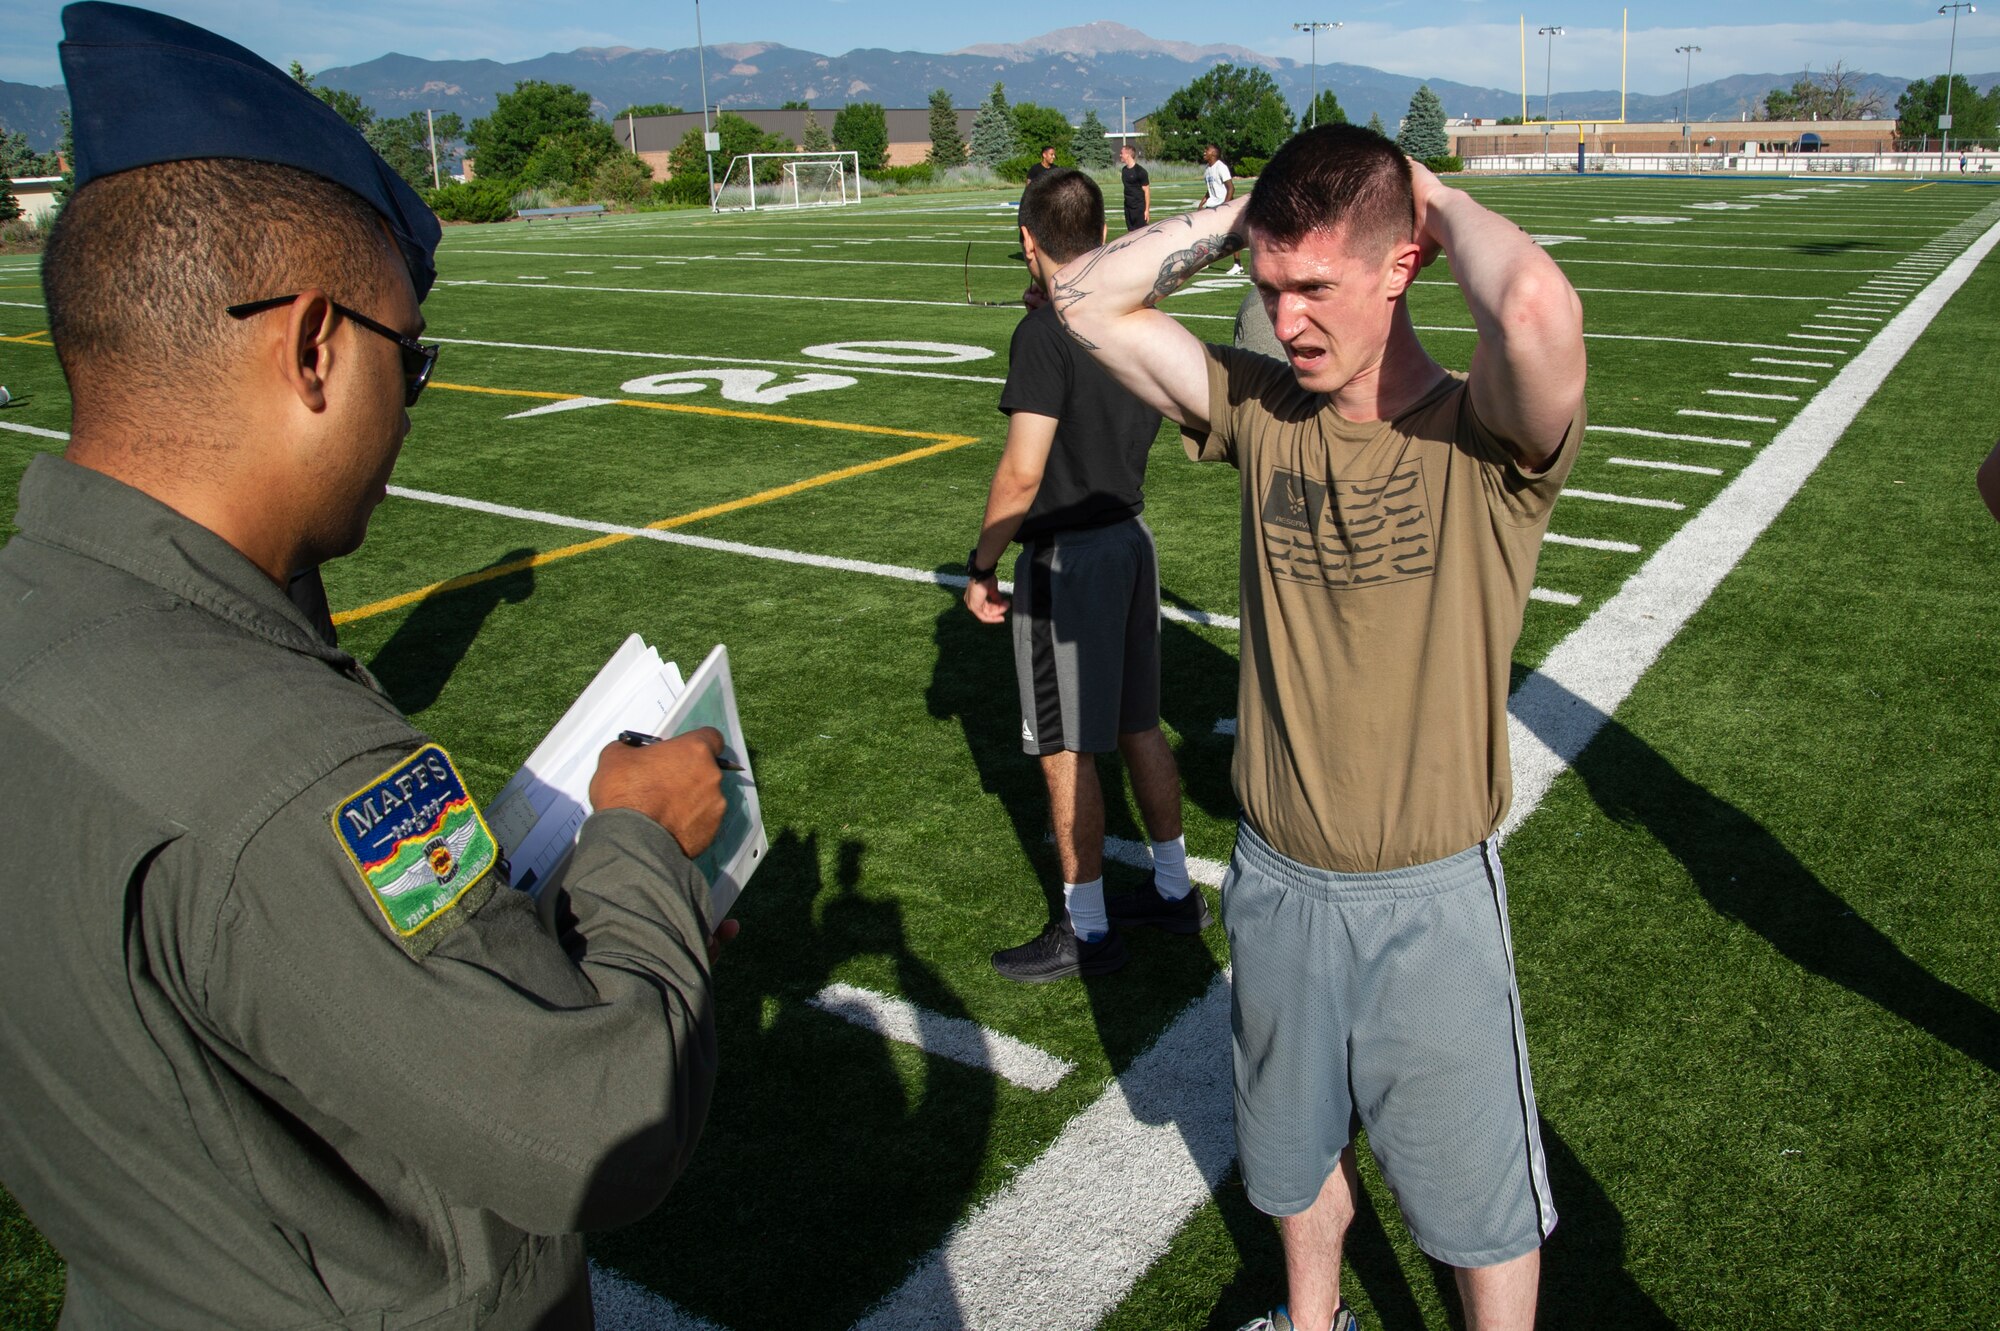 Tech. Sgt. Joshua Winn, 302nd Airlift Wing Development and Training Flight program manager, speaks to a trainee July 14, 2019 at Peterson Air Force Base, Colorado. Winn leads the flight in physical training and teaches them military structure, customs and courtesies and Air Force history so they are prepared for basic military training. (U.S. Air Force photo by Tech. Sgt. Amber Sorsek)